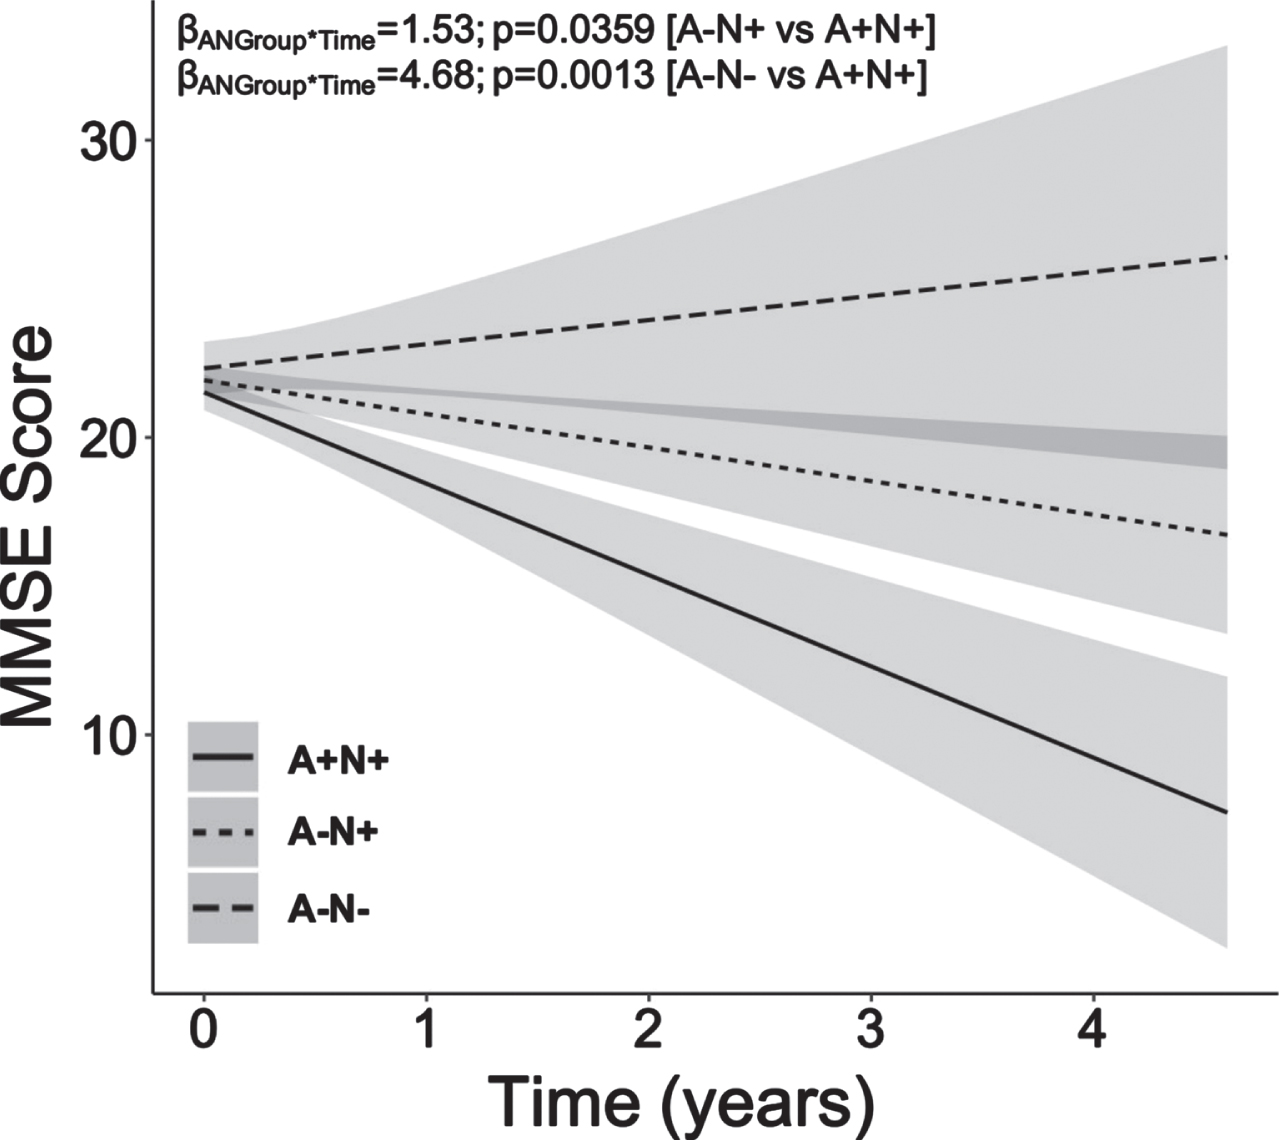 Young-onset sporadic dementia with amyloid-β pathology show steepest decline in MMSE scores compared to patients without amyloid-β, phosphorylated tau or cerebrovascular disease pathology. A+ Young-onset dementia patients showed significant decline in MMSE score than their A–T– CVD– counterparts. However, predominant CVD pathology and predominant T pathology did not significantly influence cognitive decline in comparison to normal biomarker A–T– CVD– patients. Baseline age, sex, education years and baseline MMSE were included as covariates. MMSE, Mini-Mental State Examination; A, amyloid-β; CVD, cerebrovascular disease; T, phospho-tau.